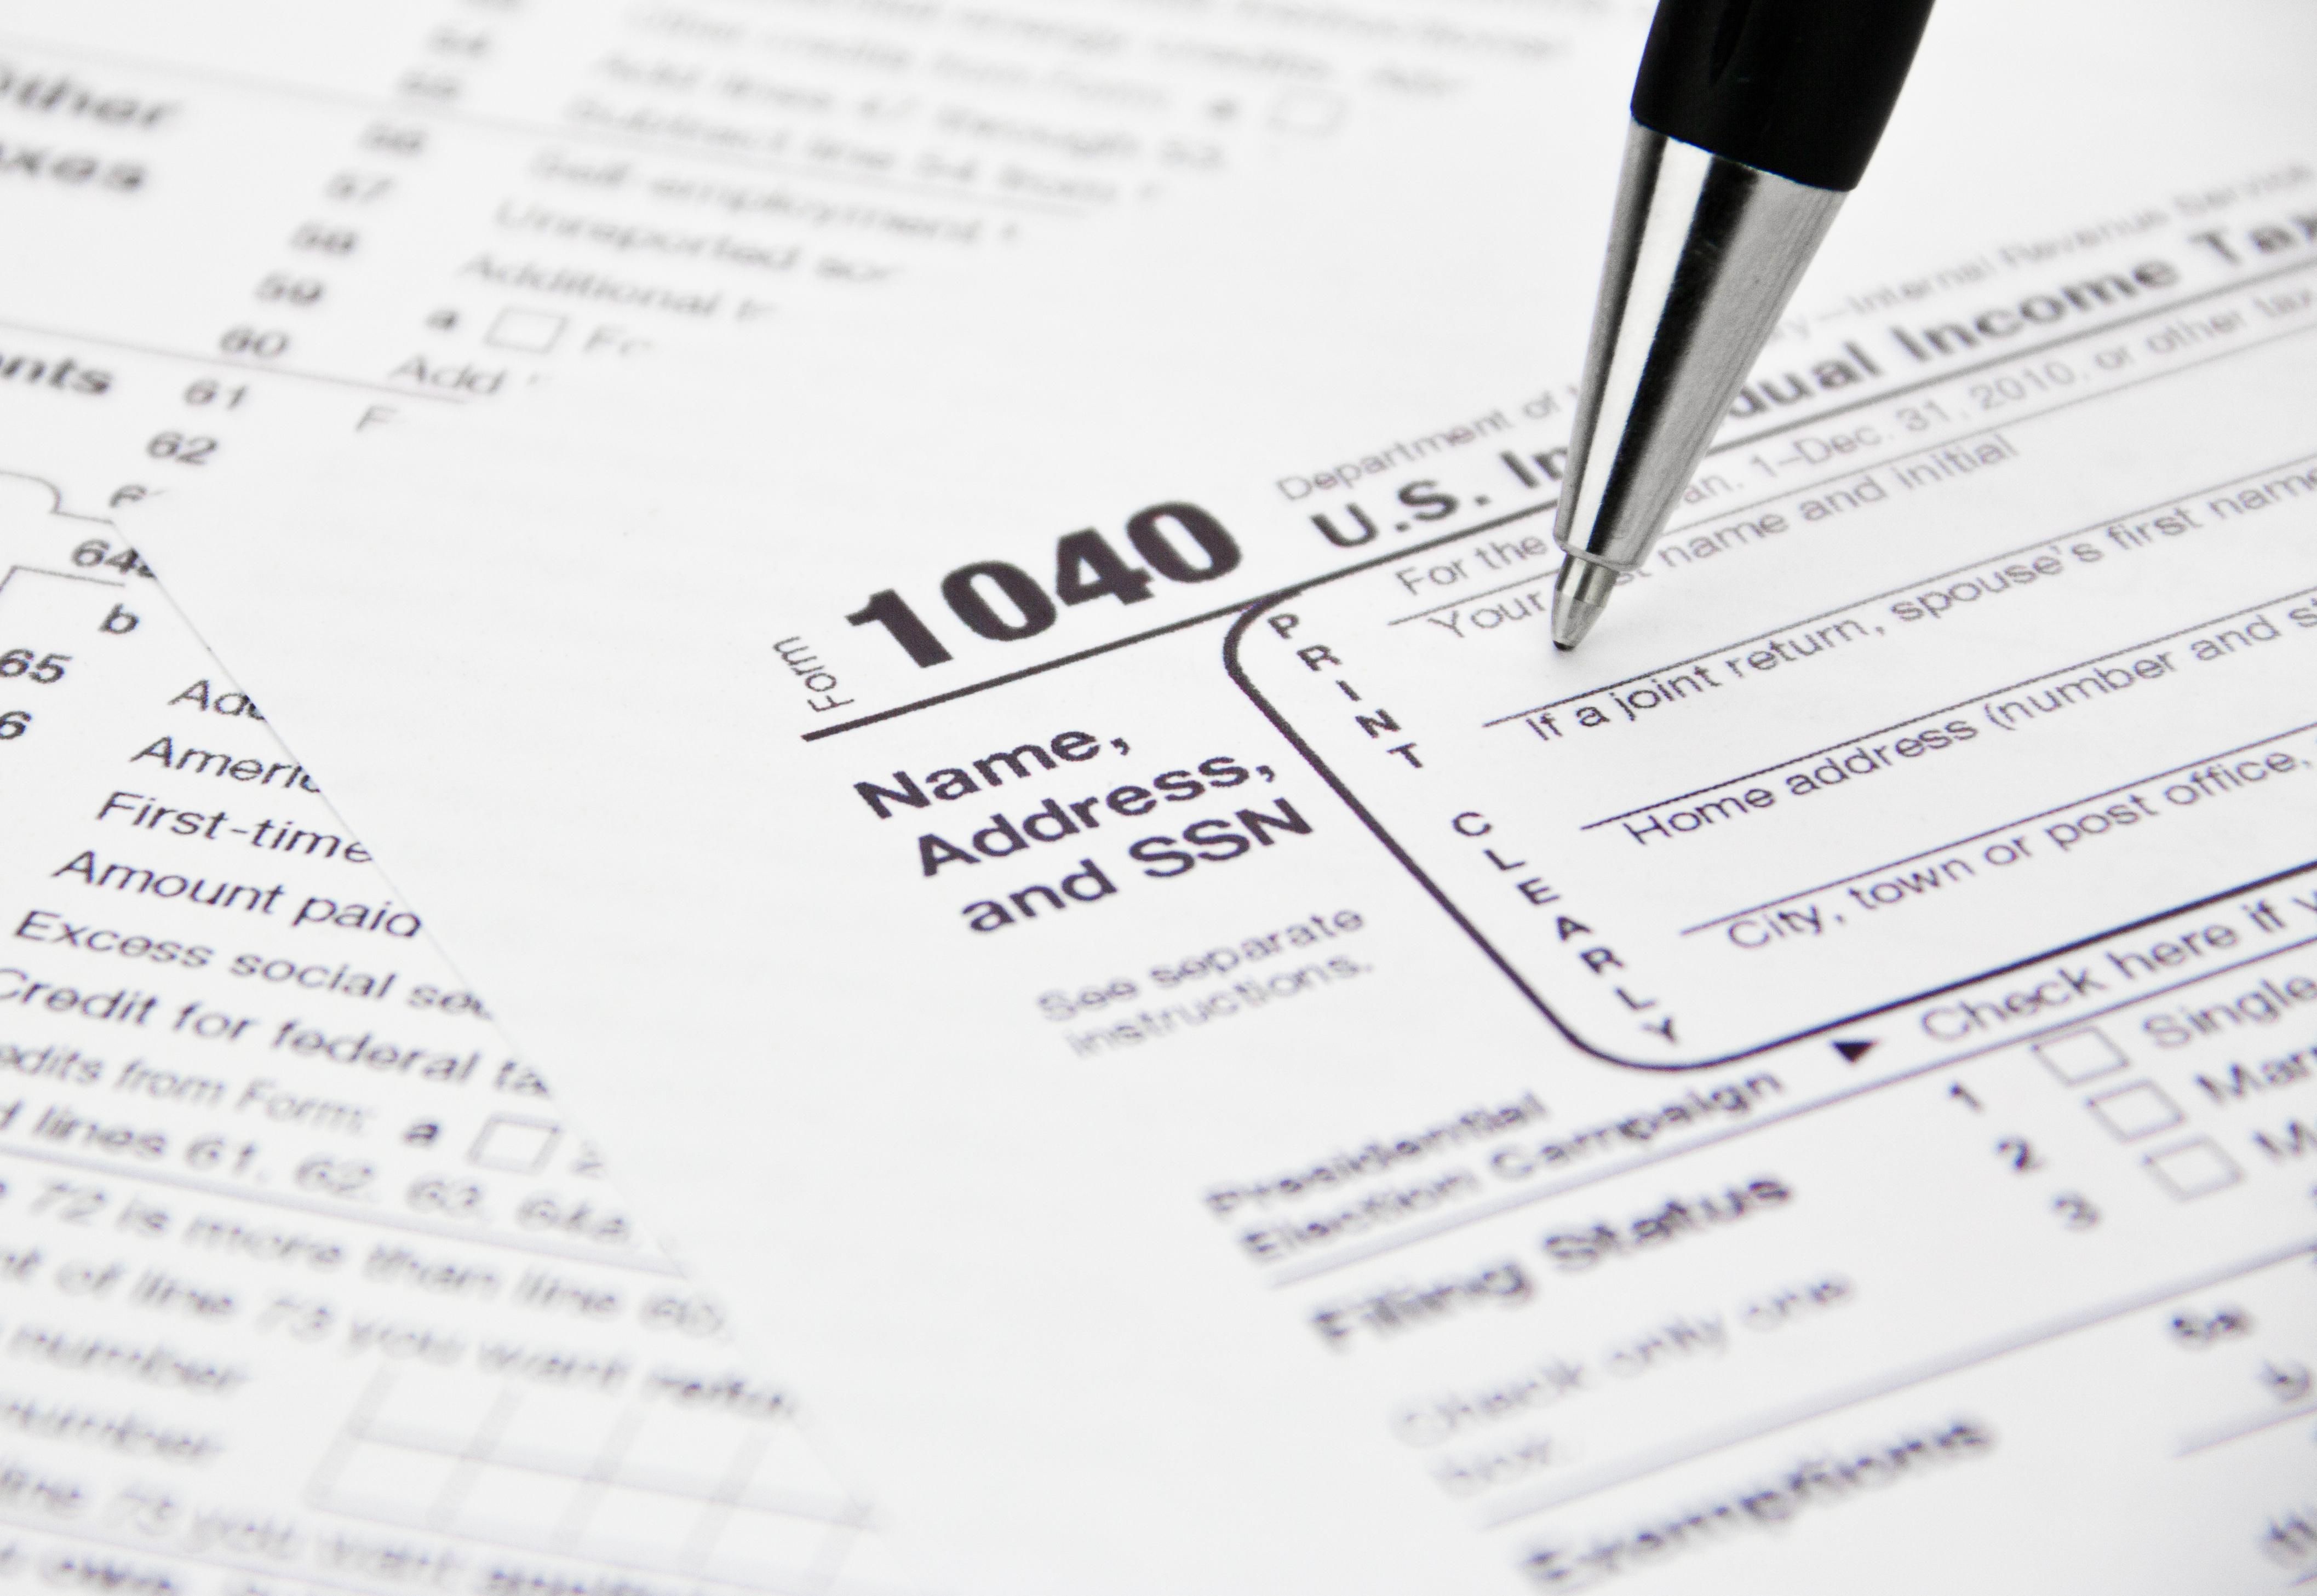 IRS tax form 1040 being filled out.